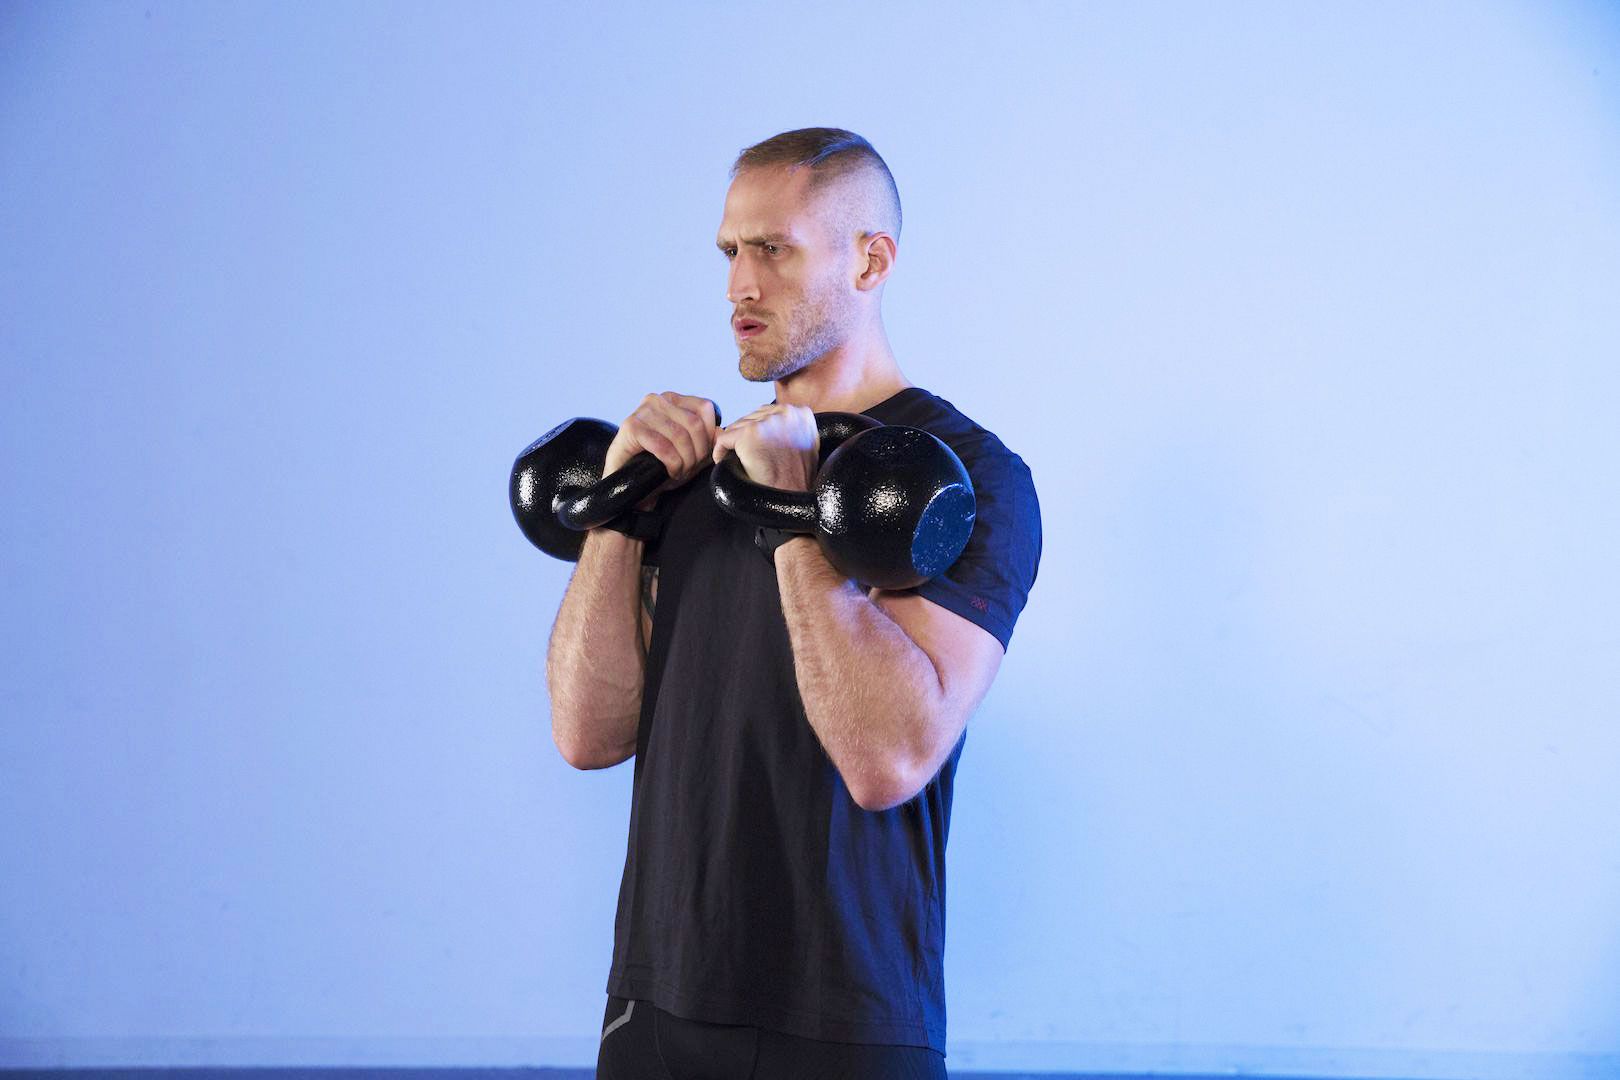 Double kettlebell front squat exercise instructions and video